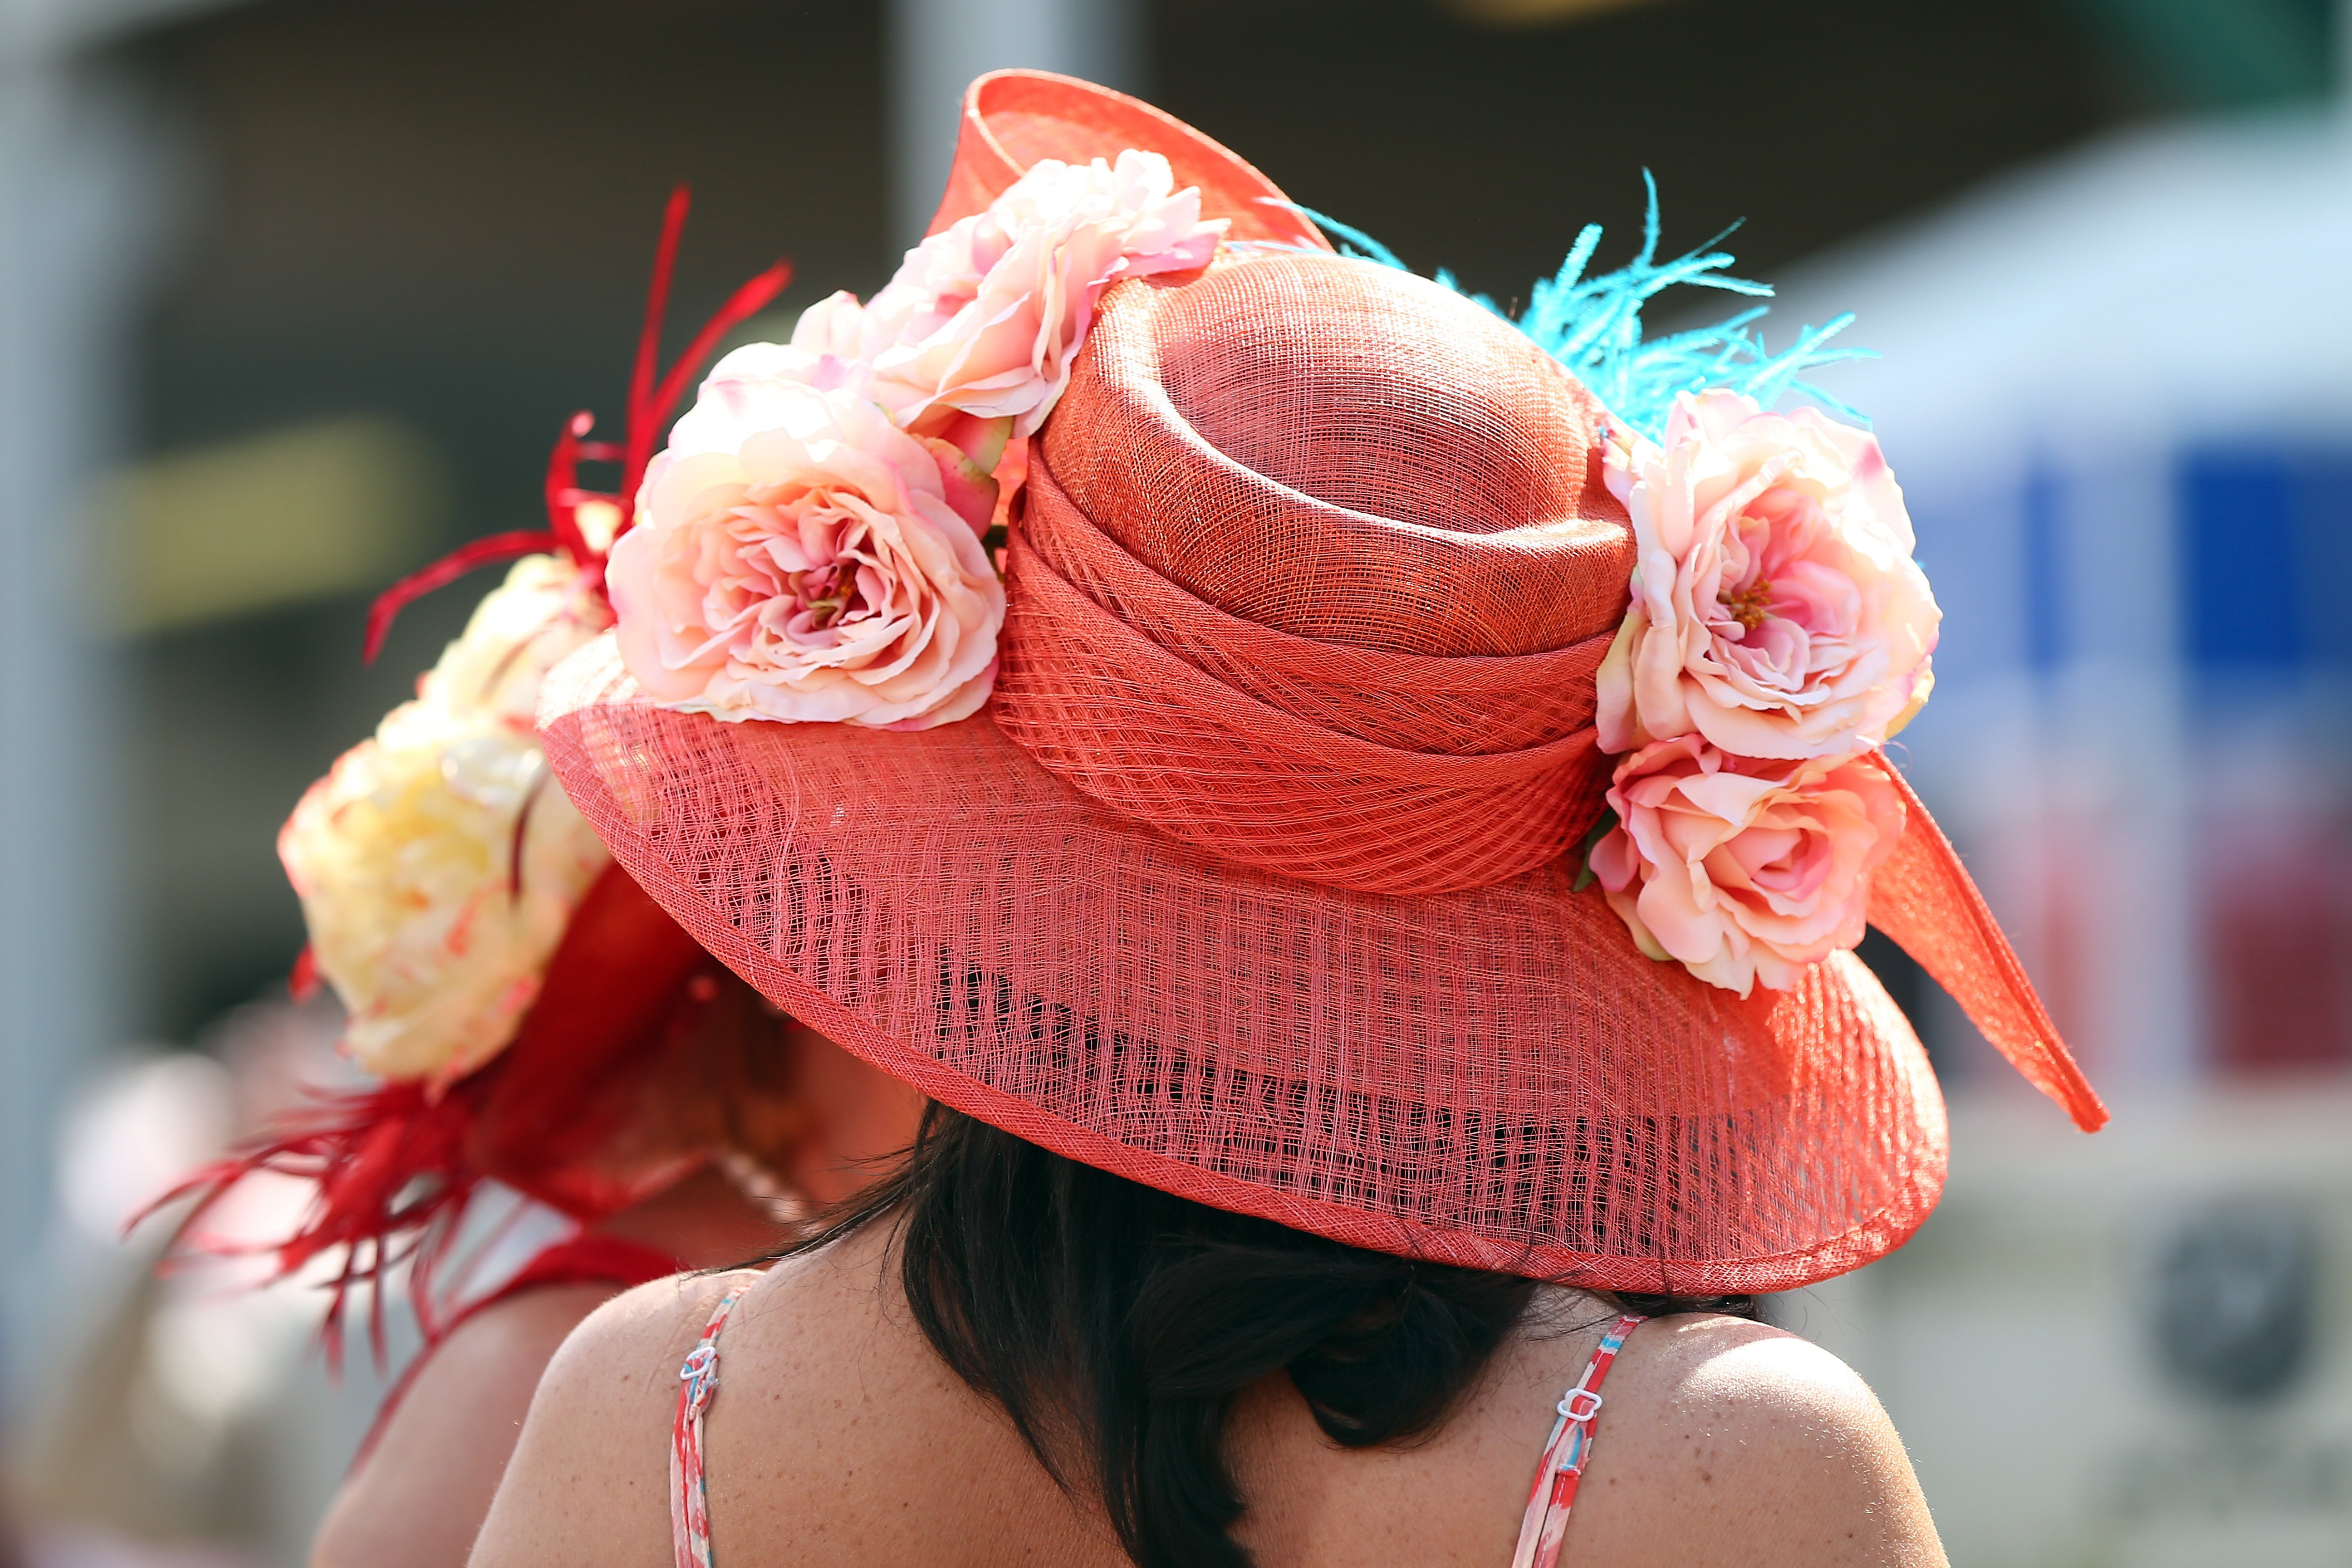 Woman with a hat during the 141st running of the Kentucky Oaks horse race at Churchill Downs on May 2, 2015, in Louisville, Ky.